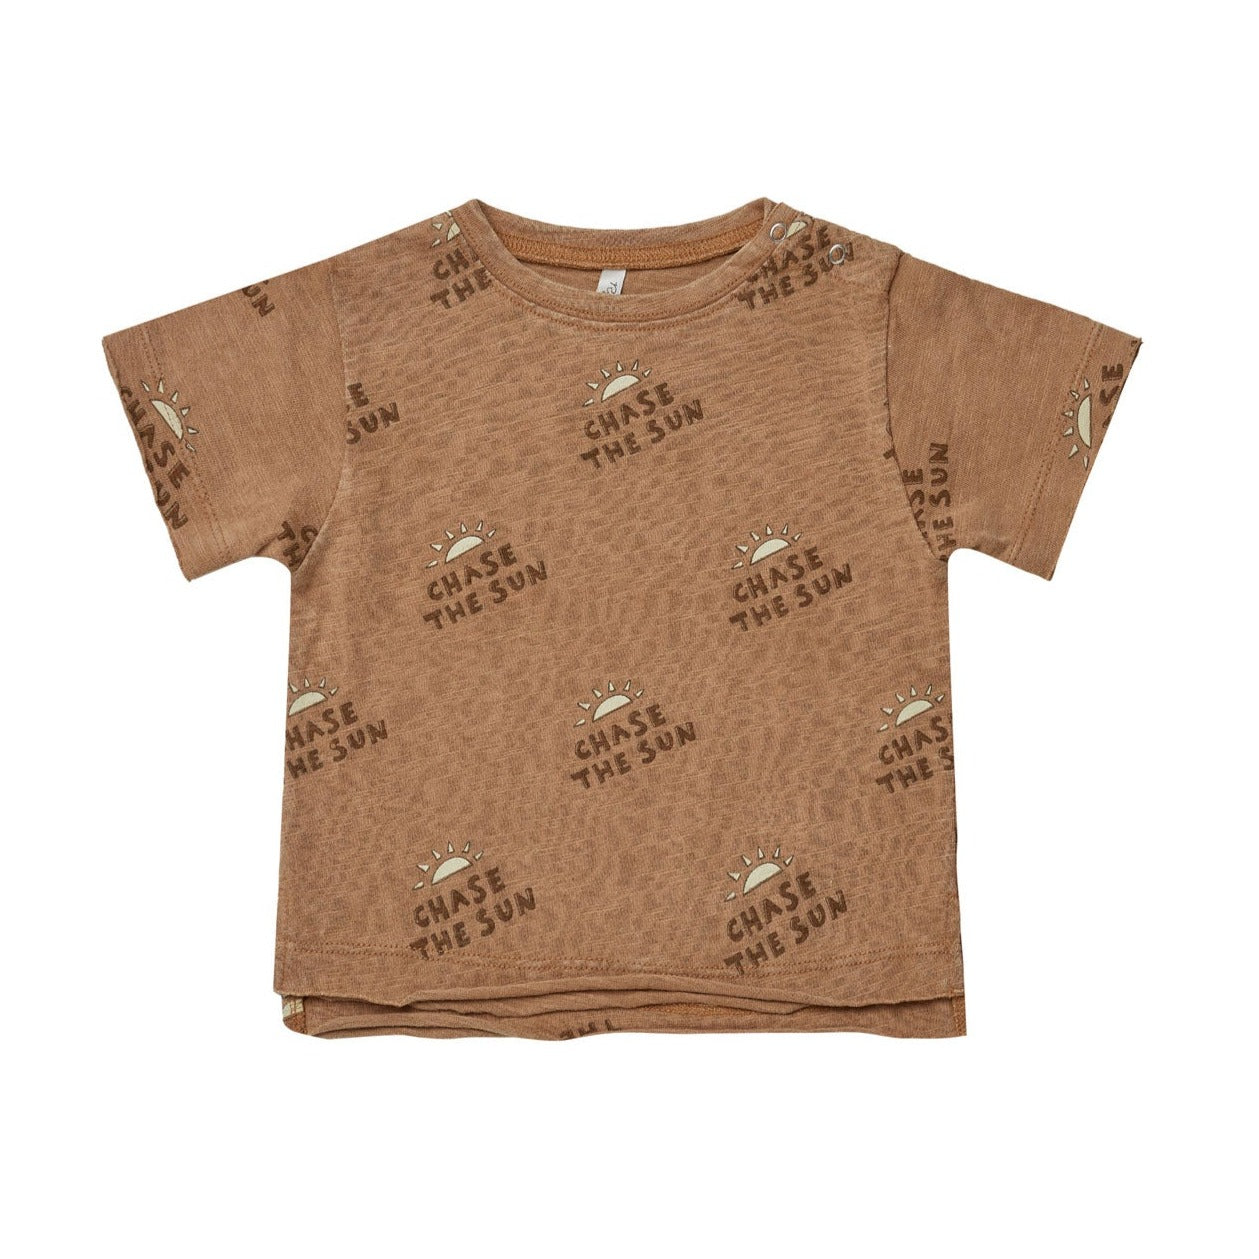 Rylee and Cru Raw Edge T-Shirt - Chase the Sun - Camel